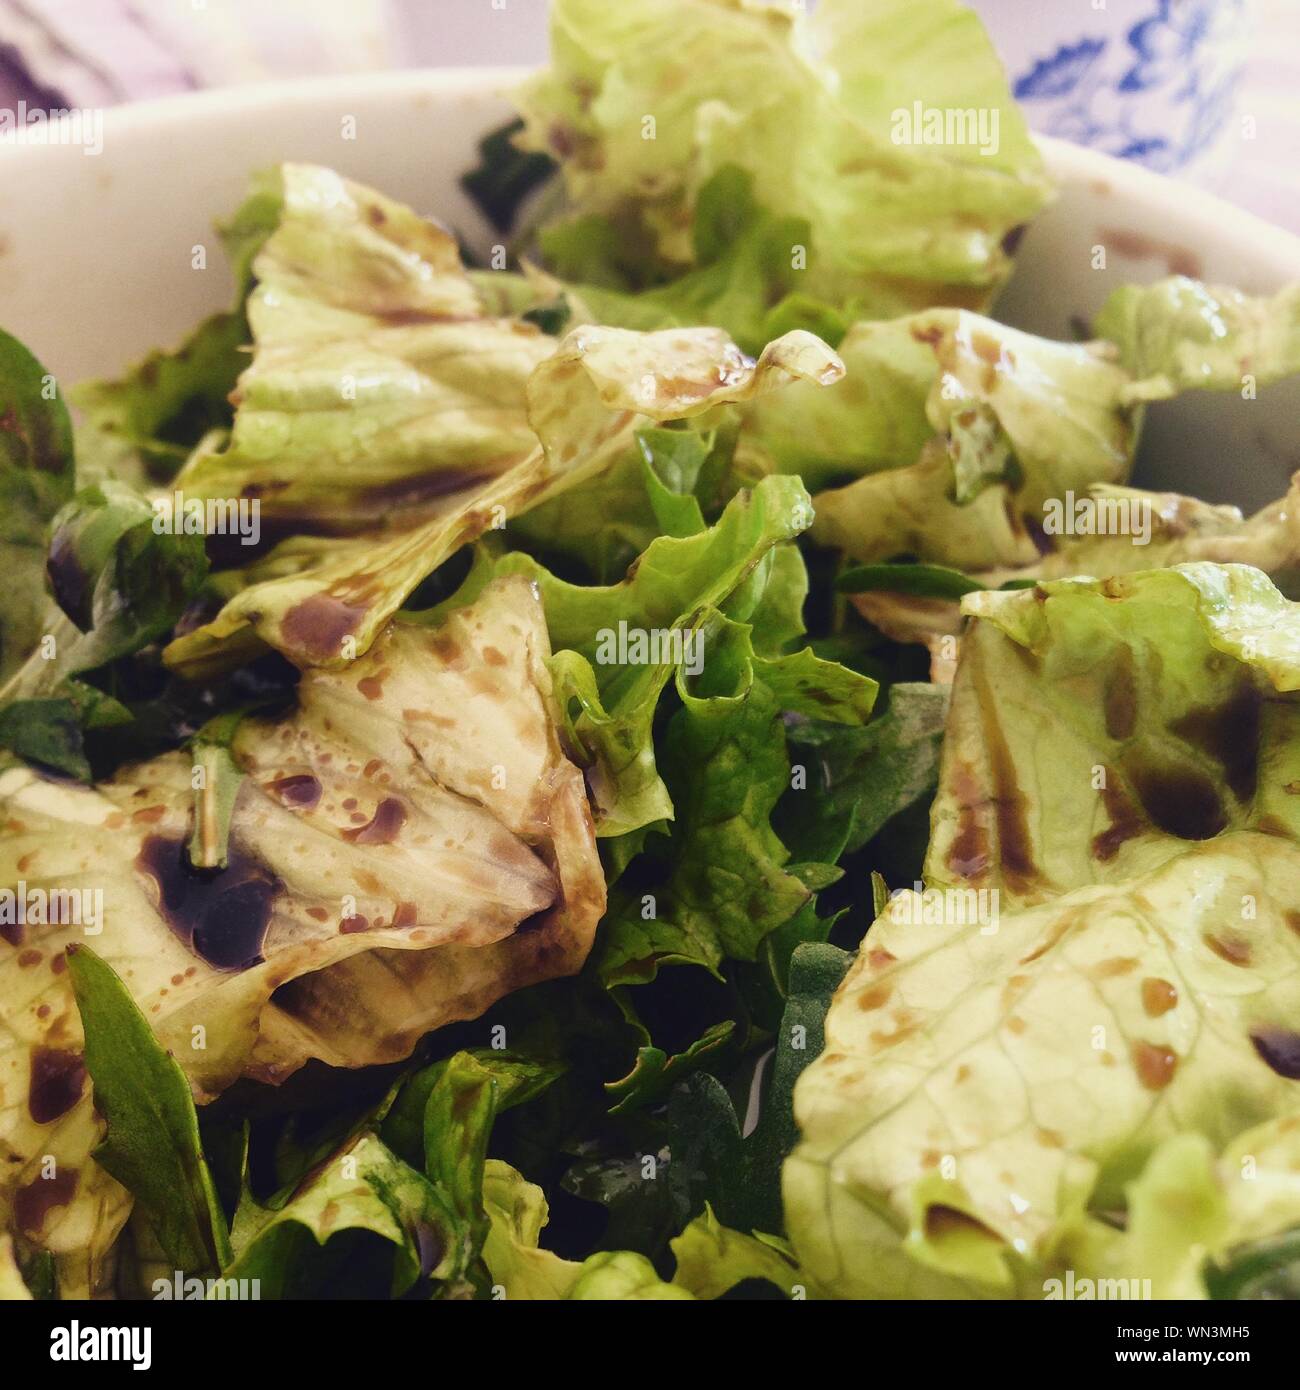 Close-up Of Salad With Balsamic Vinegar In Bowl Stock Photo